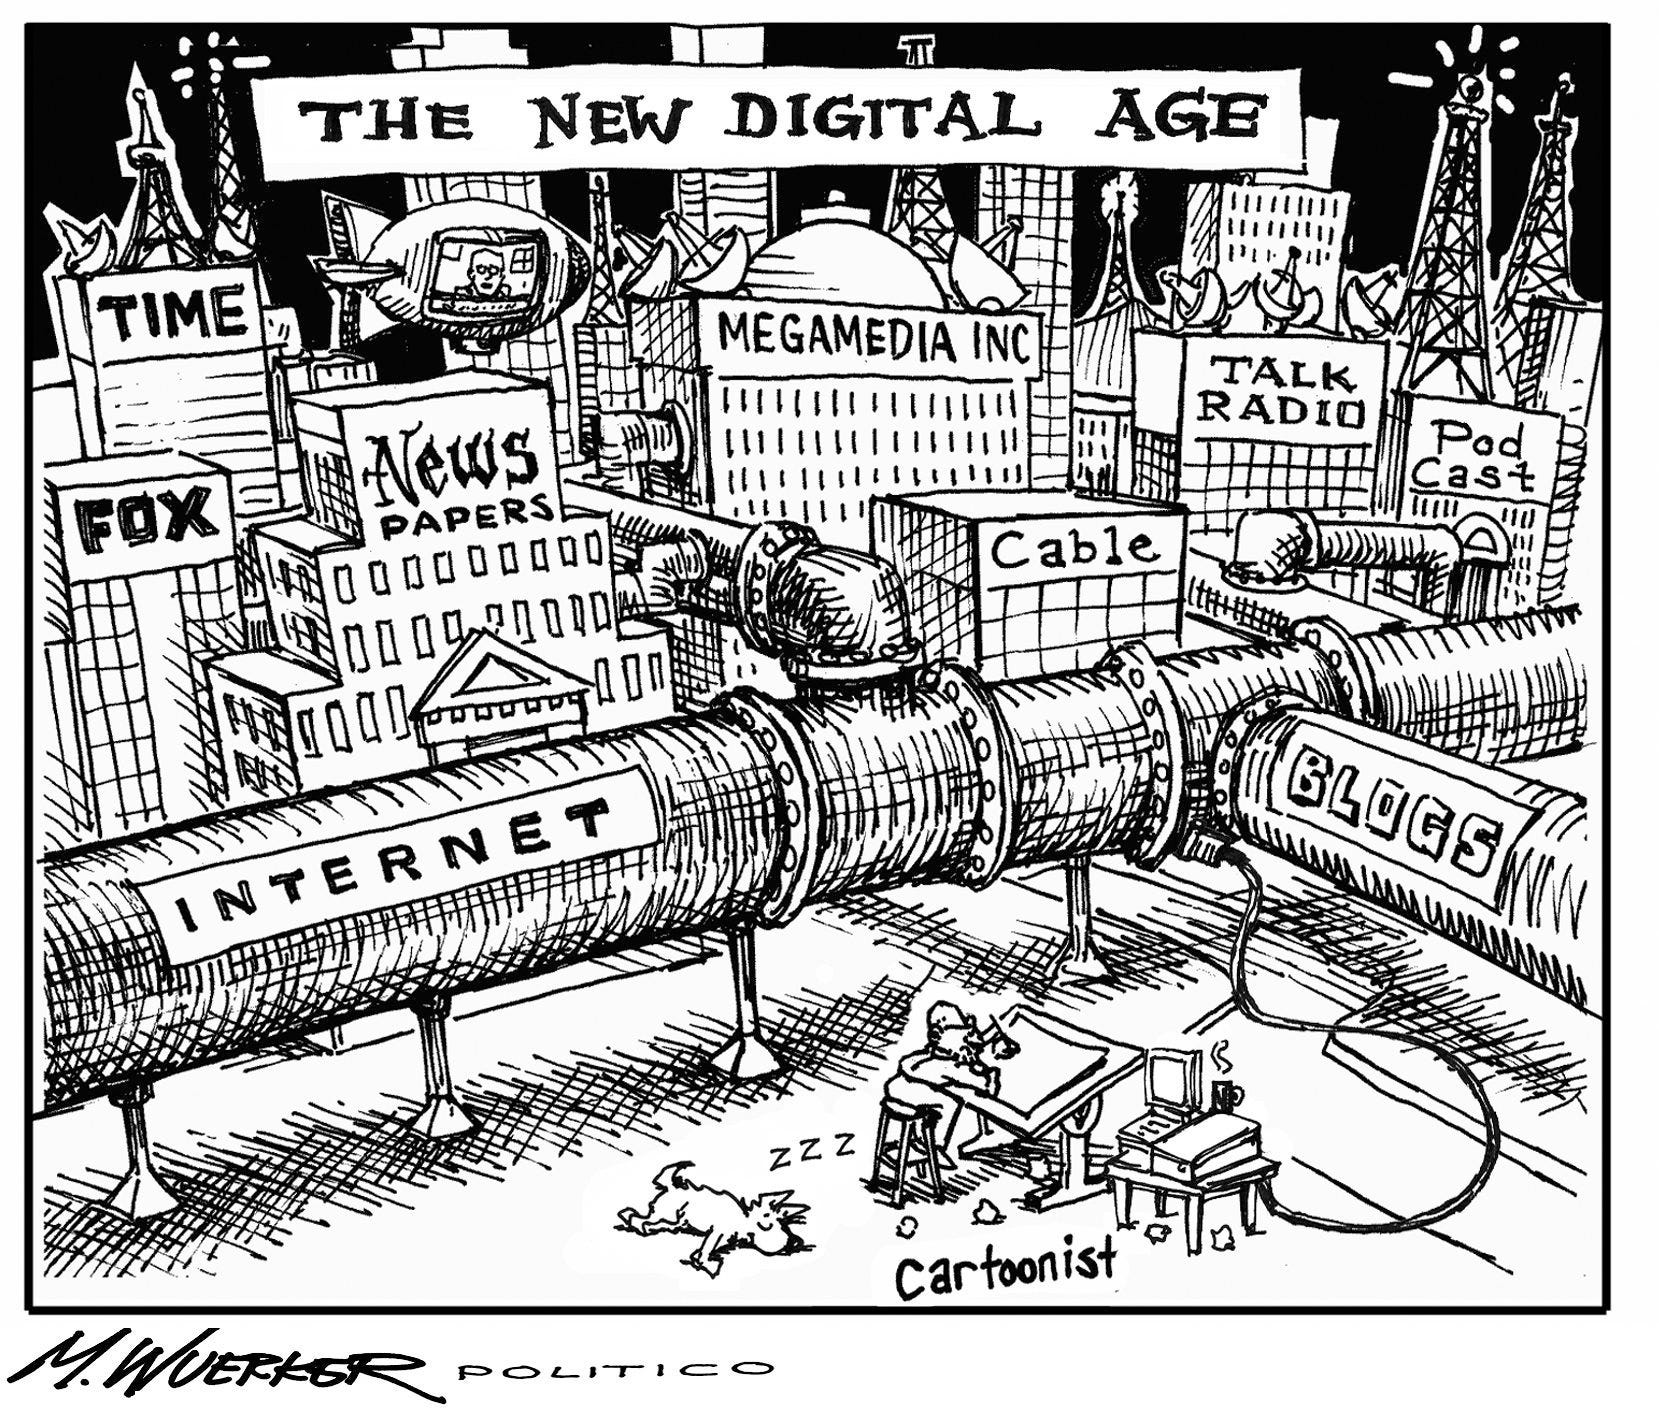 THE NEW DIGITAL AGE